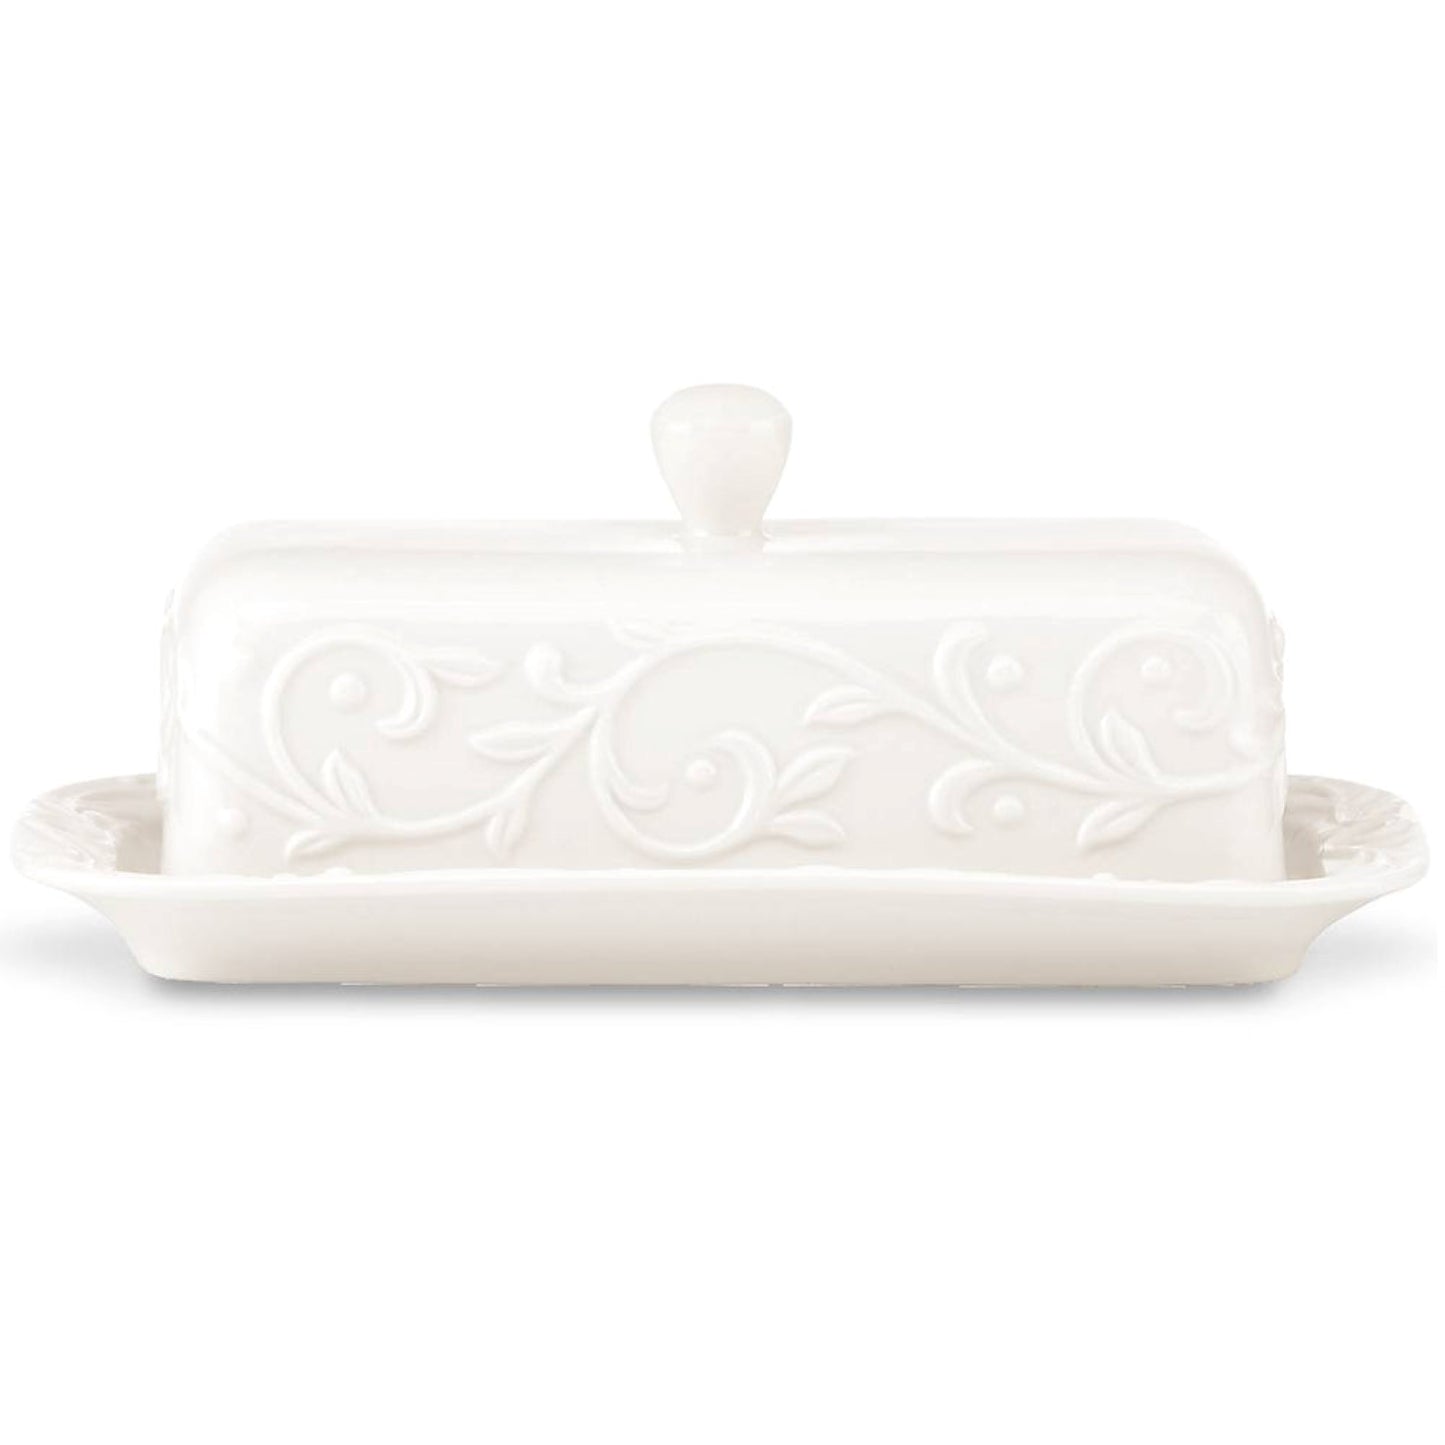 Lenox Opal Innocence Carved Covered Butter Dish.